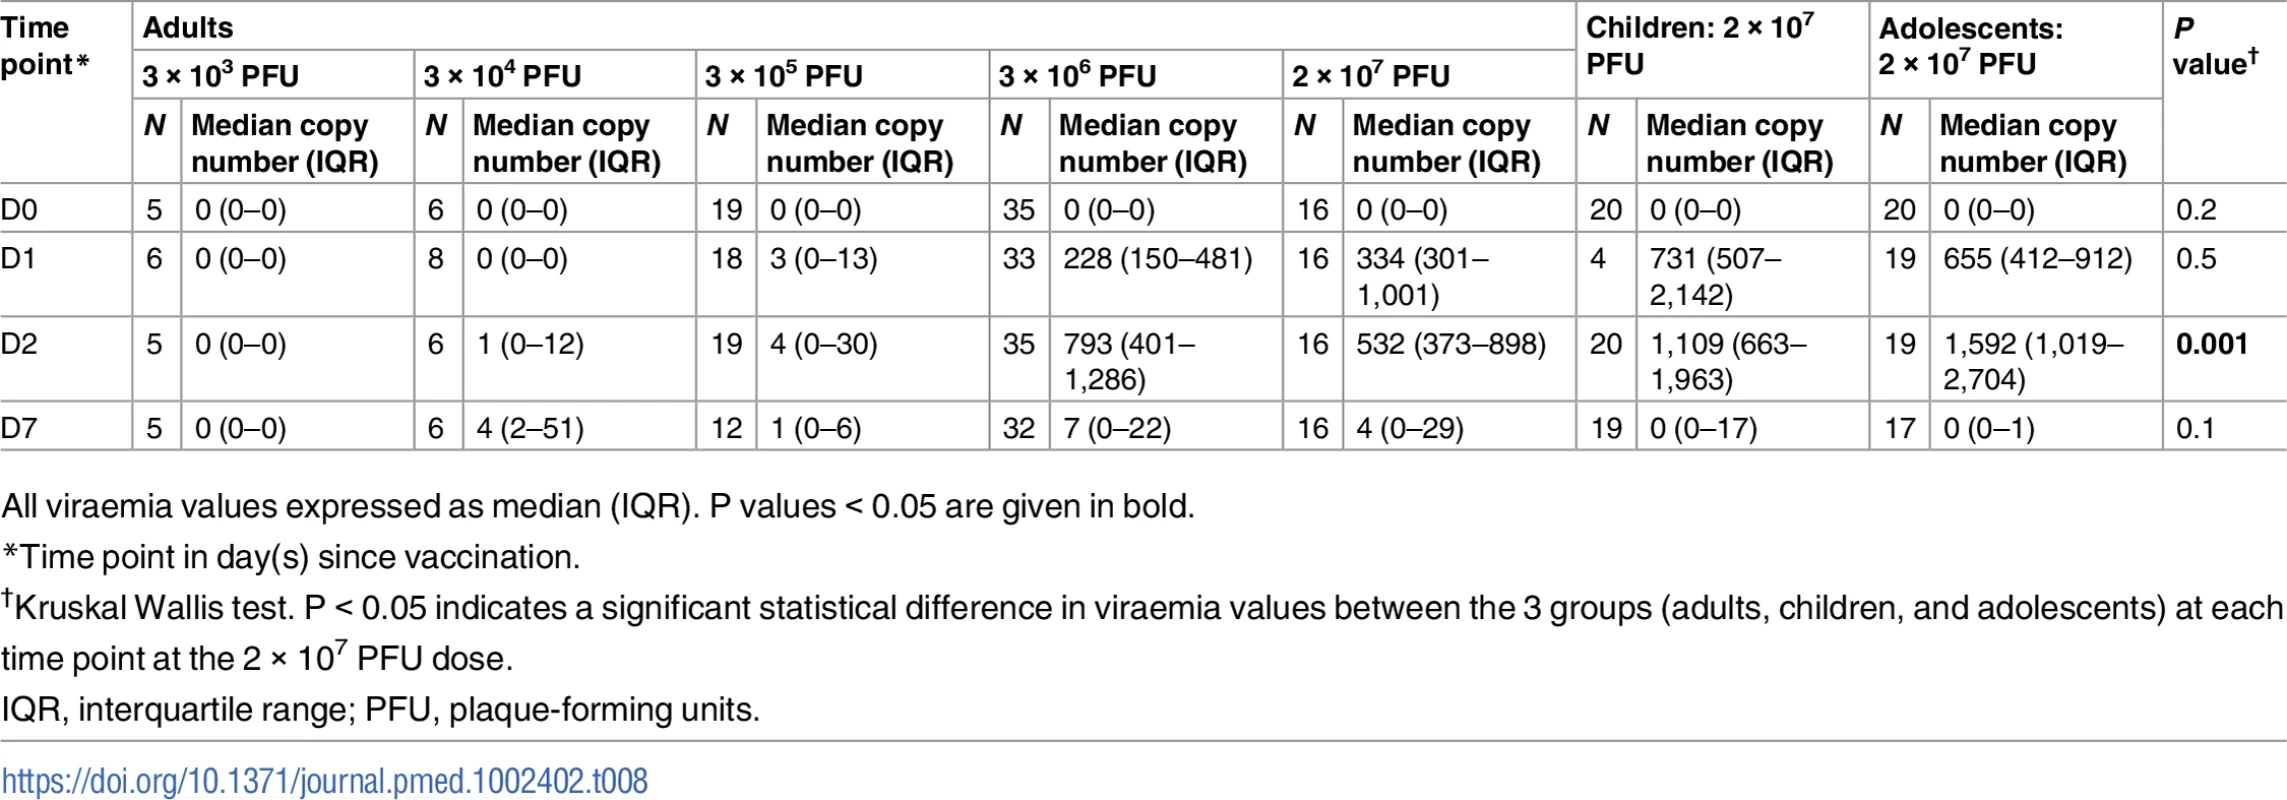 Description of viraemia by dose and age.